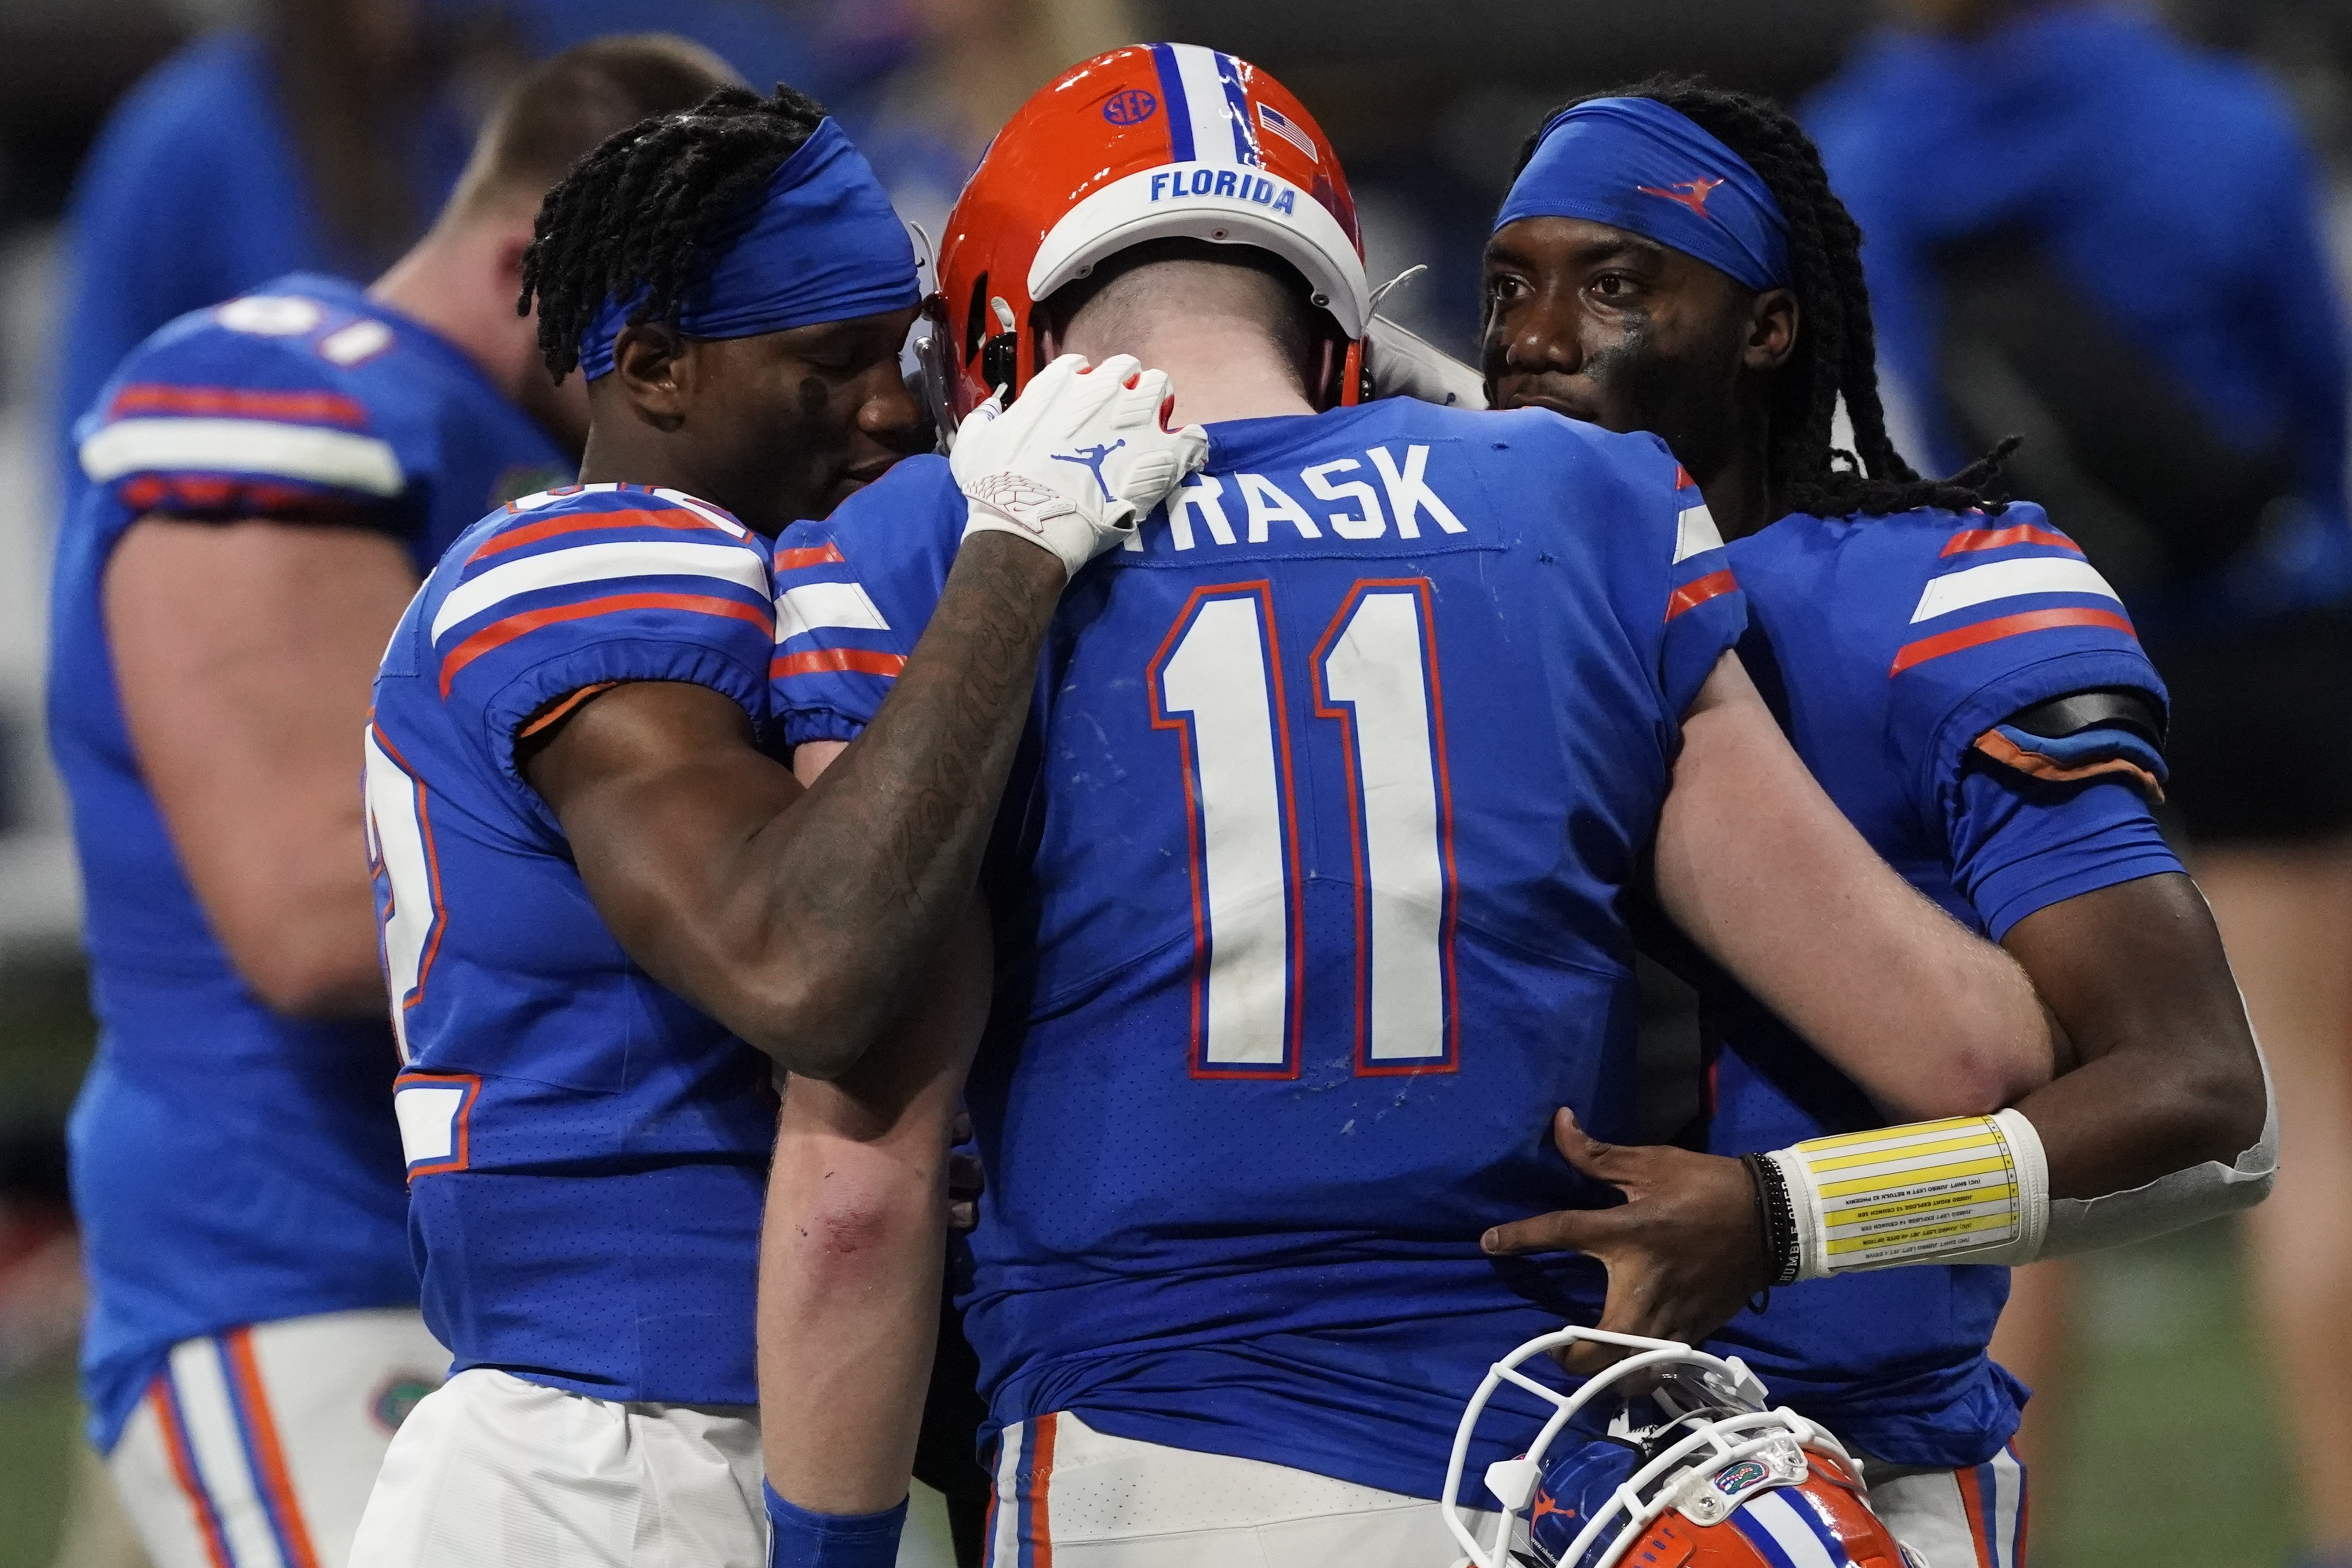 Florida Football: 5 quick takeaways from the first half of UF vs. USF